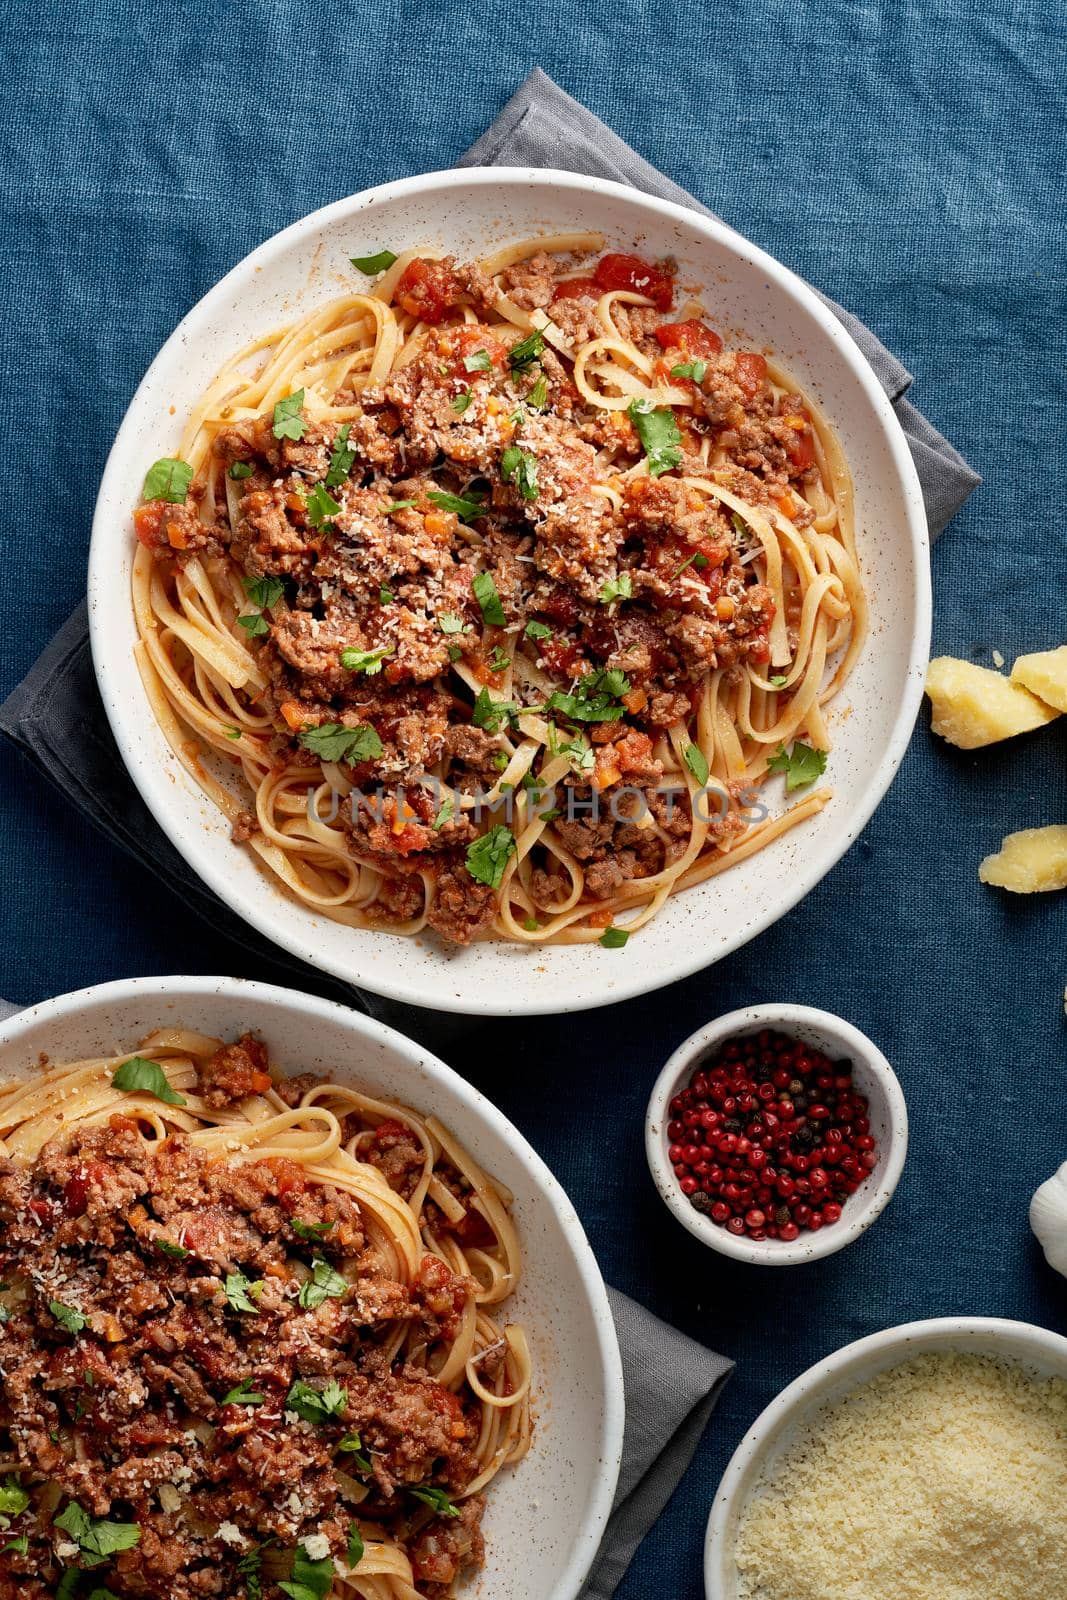 Pasta Bolognese Linguine with mincemeat, tomatoes, parmesan cheese. Italian dinner for two person by NataBene